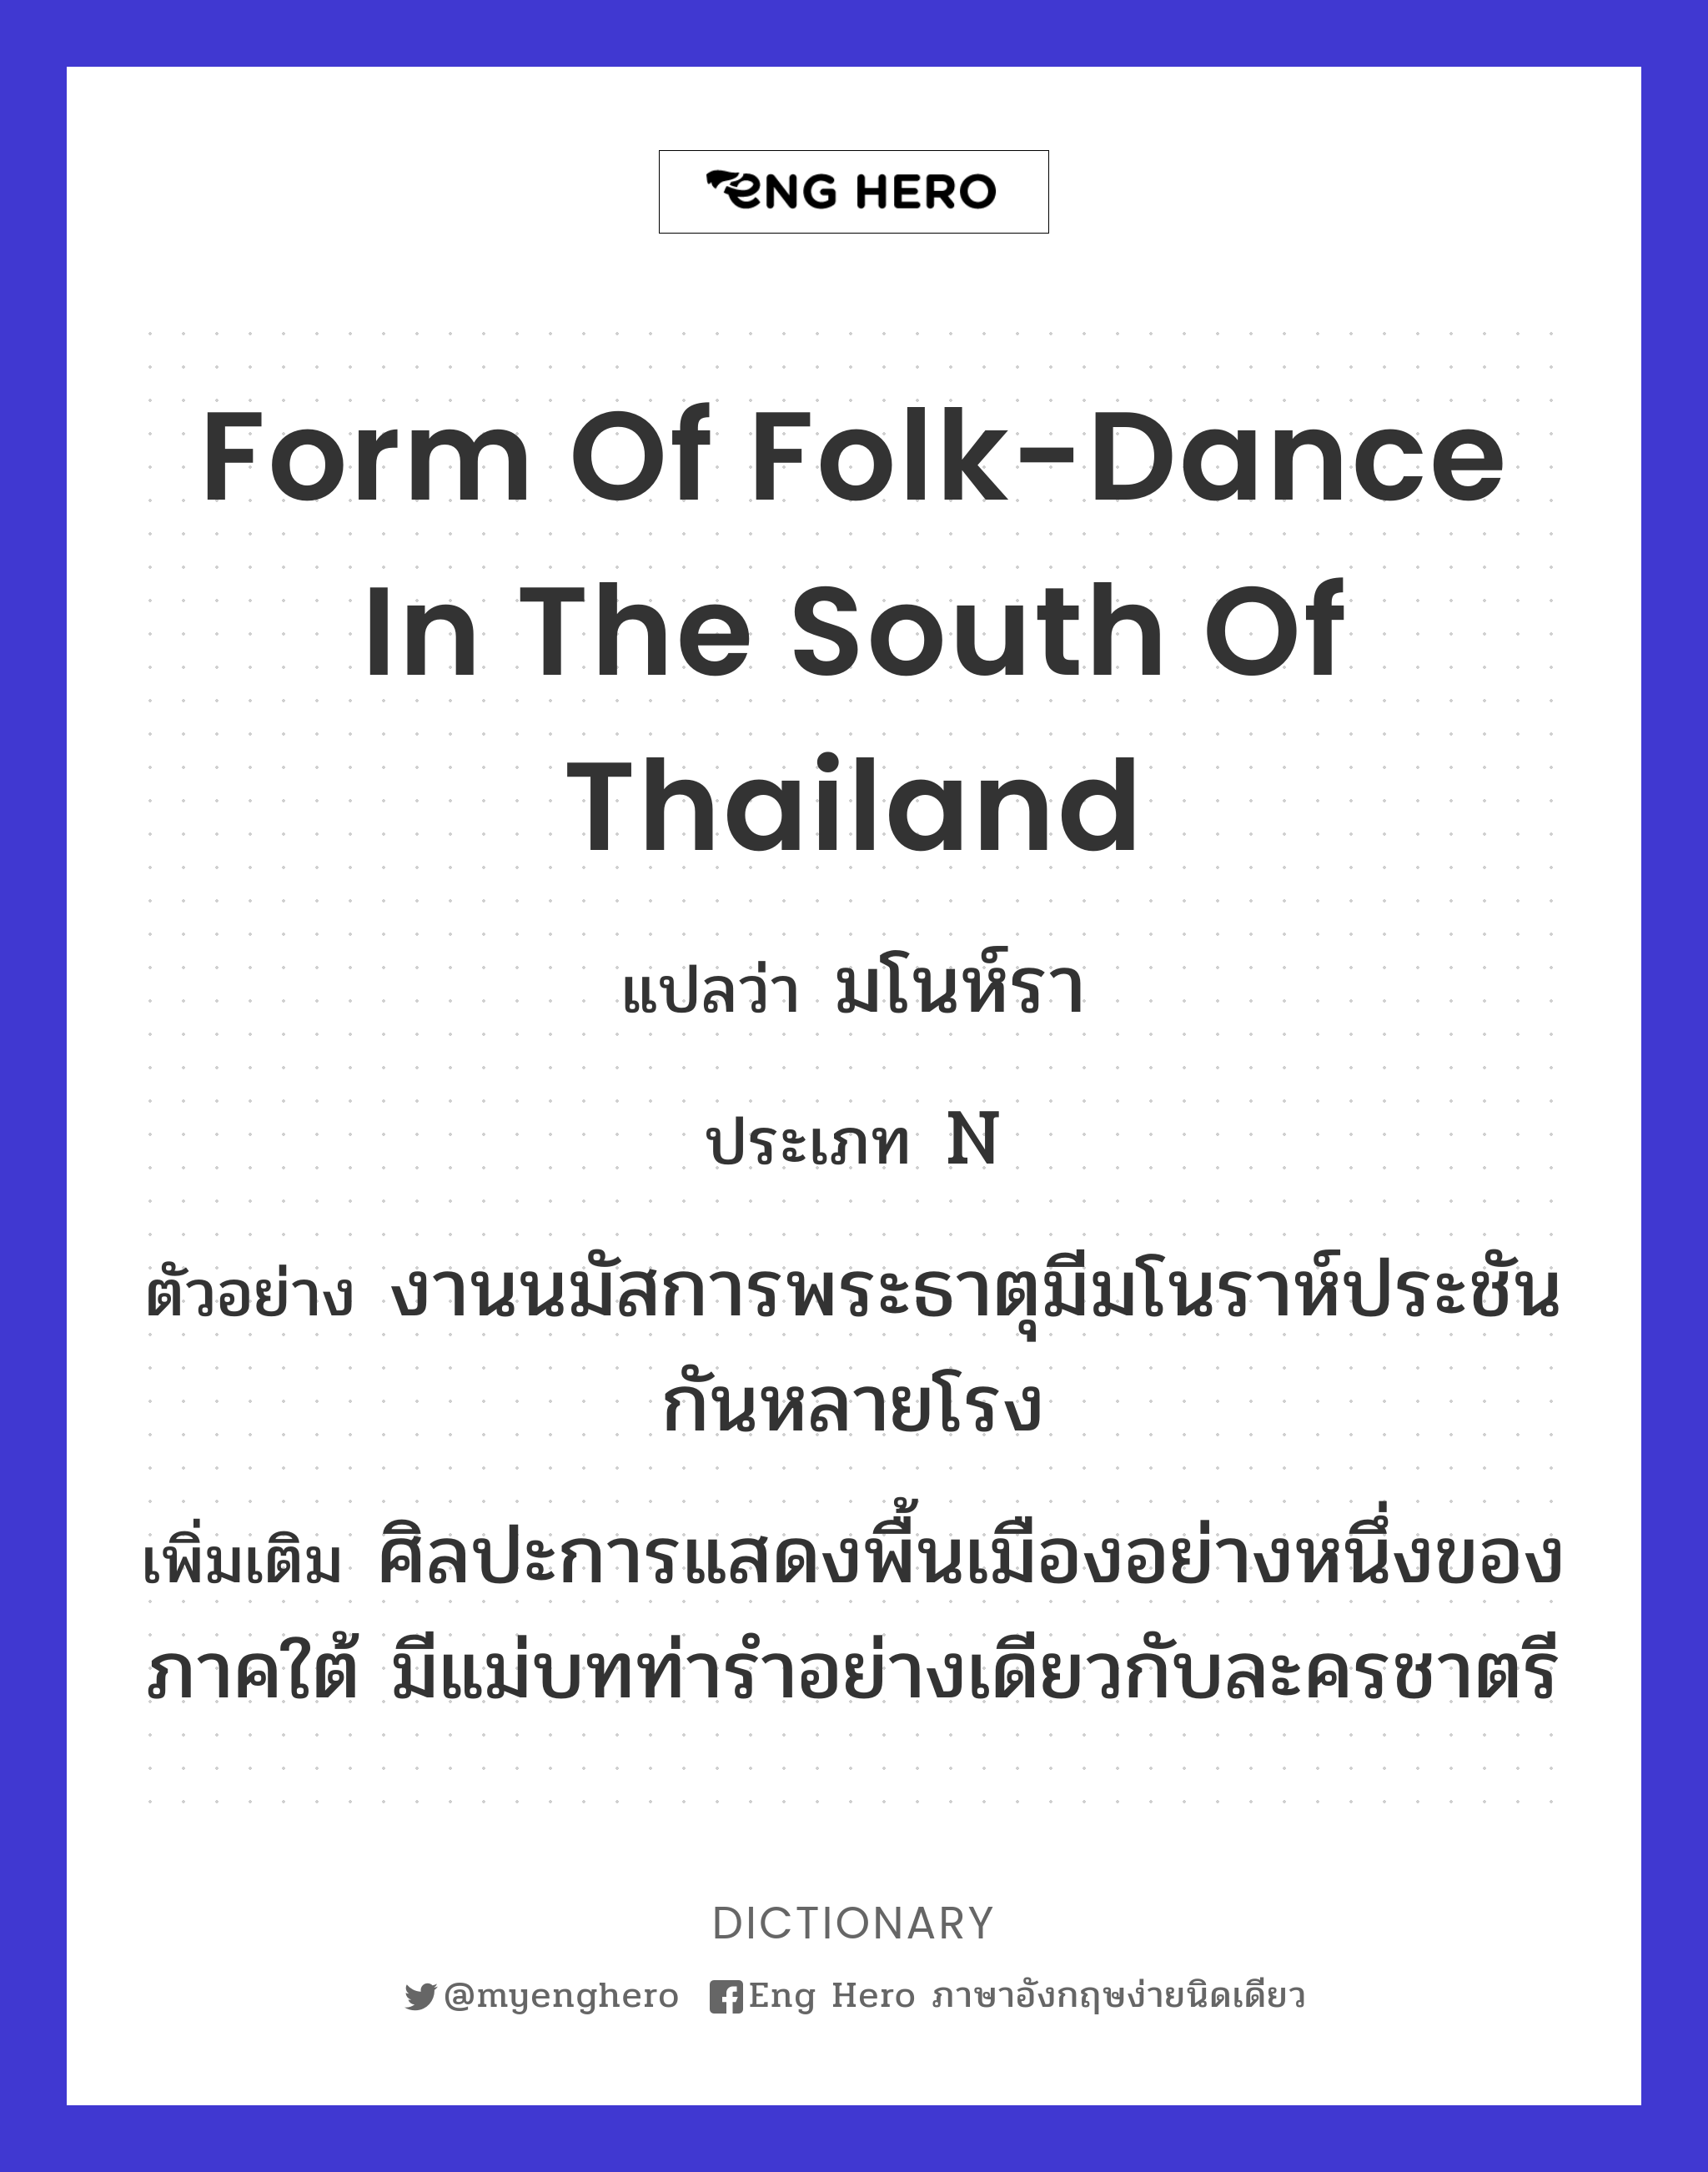 form of folk-dance in the south of Thailand